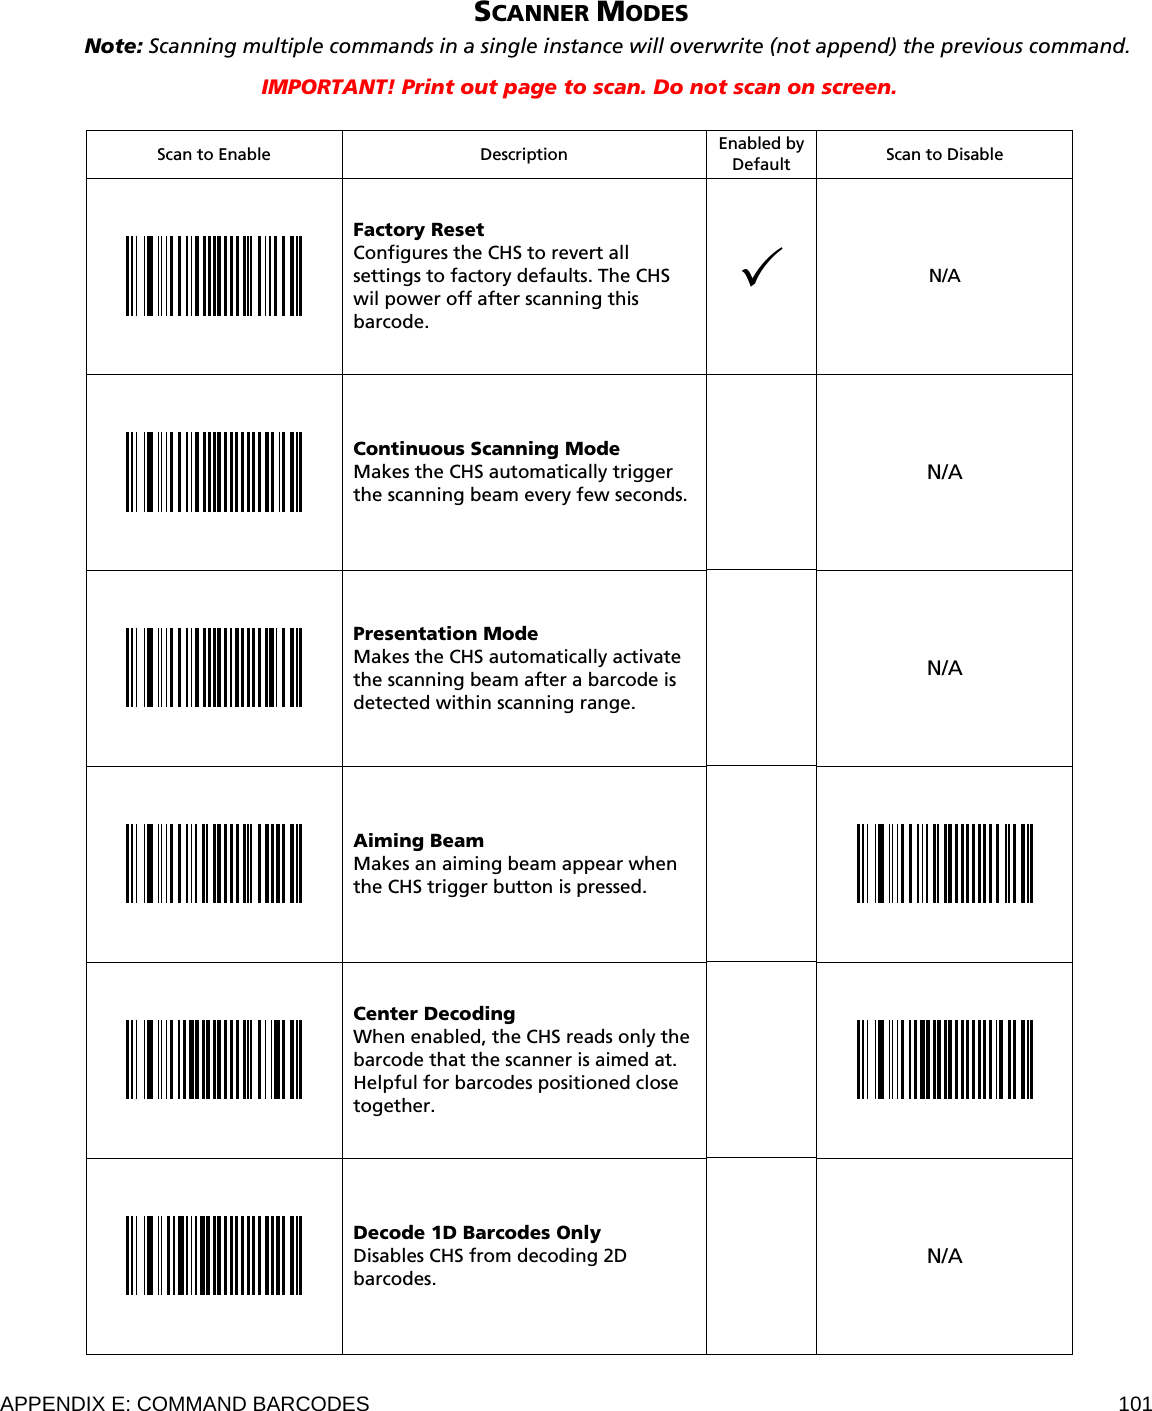  APPENDIX E: COMMAND BARCODES  101 SCANNER MODES  Note: Scanning multiple commands in a single instance will overwrite (not append) the previous command.  IMPORTANT! Print out page to scan. Do not scan on screen.   Scan to Enable  Description Enabled by Default  Scan to Disable  Factory Reset Configures the CHS to revert all settings to factory defaults. The CHS wil power off after scanning this barcode.  N/A  Continuous Scanning Mode Makes the CHS automatically trigger the scanning beam every few seconds.  N/A  Presentation Mode Makes the CHS automatically activate the scanning beam after a barcode is detected within scanning range.  N/A  Aiming Beam Makes an aiming beam appear when the CHS trigger button is pressed.    Center Decoding When enabled, the CHS reads only the barcode that the scanner is aimed at. Helpful for barcodes positioned close together.    Decode 1D Barcodes Only Disables CHS from decoding 2D barcodes.  N/A  